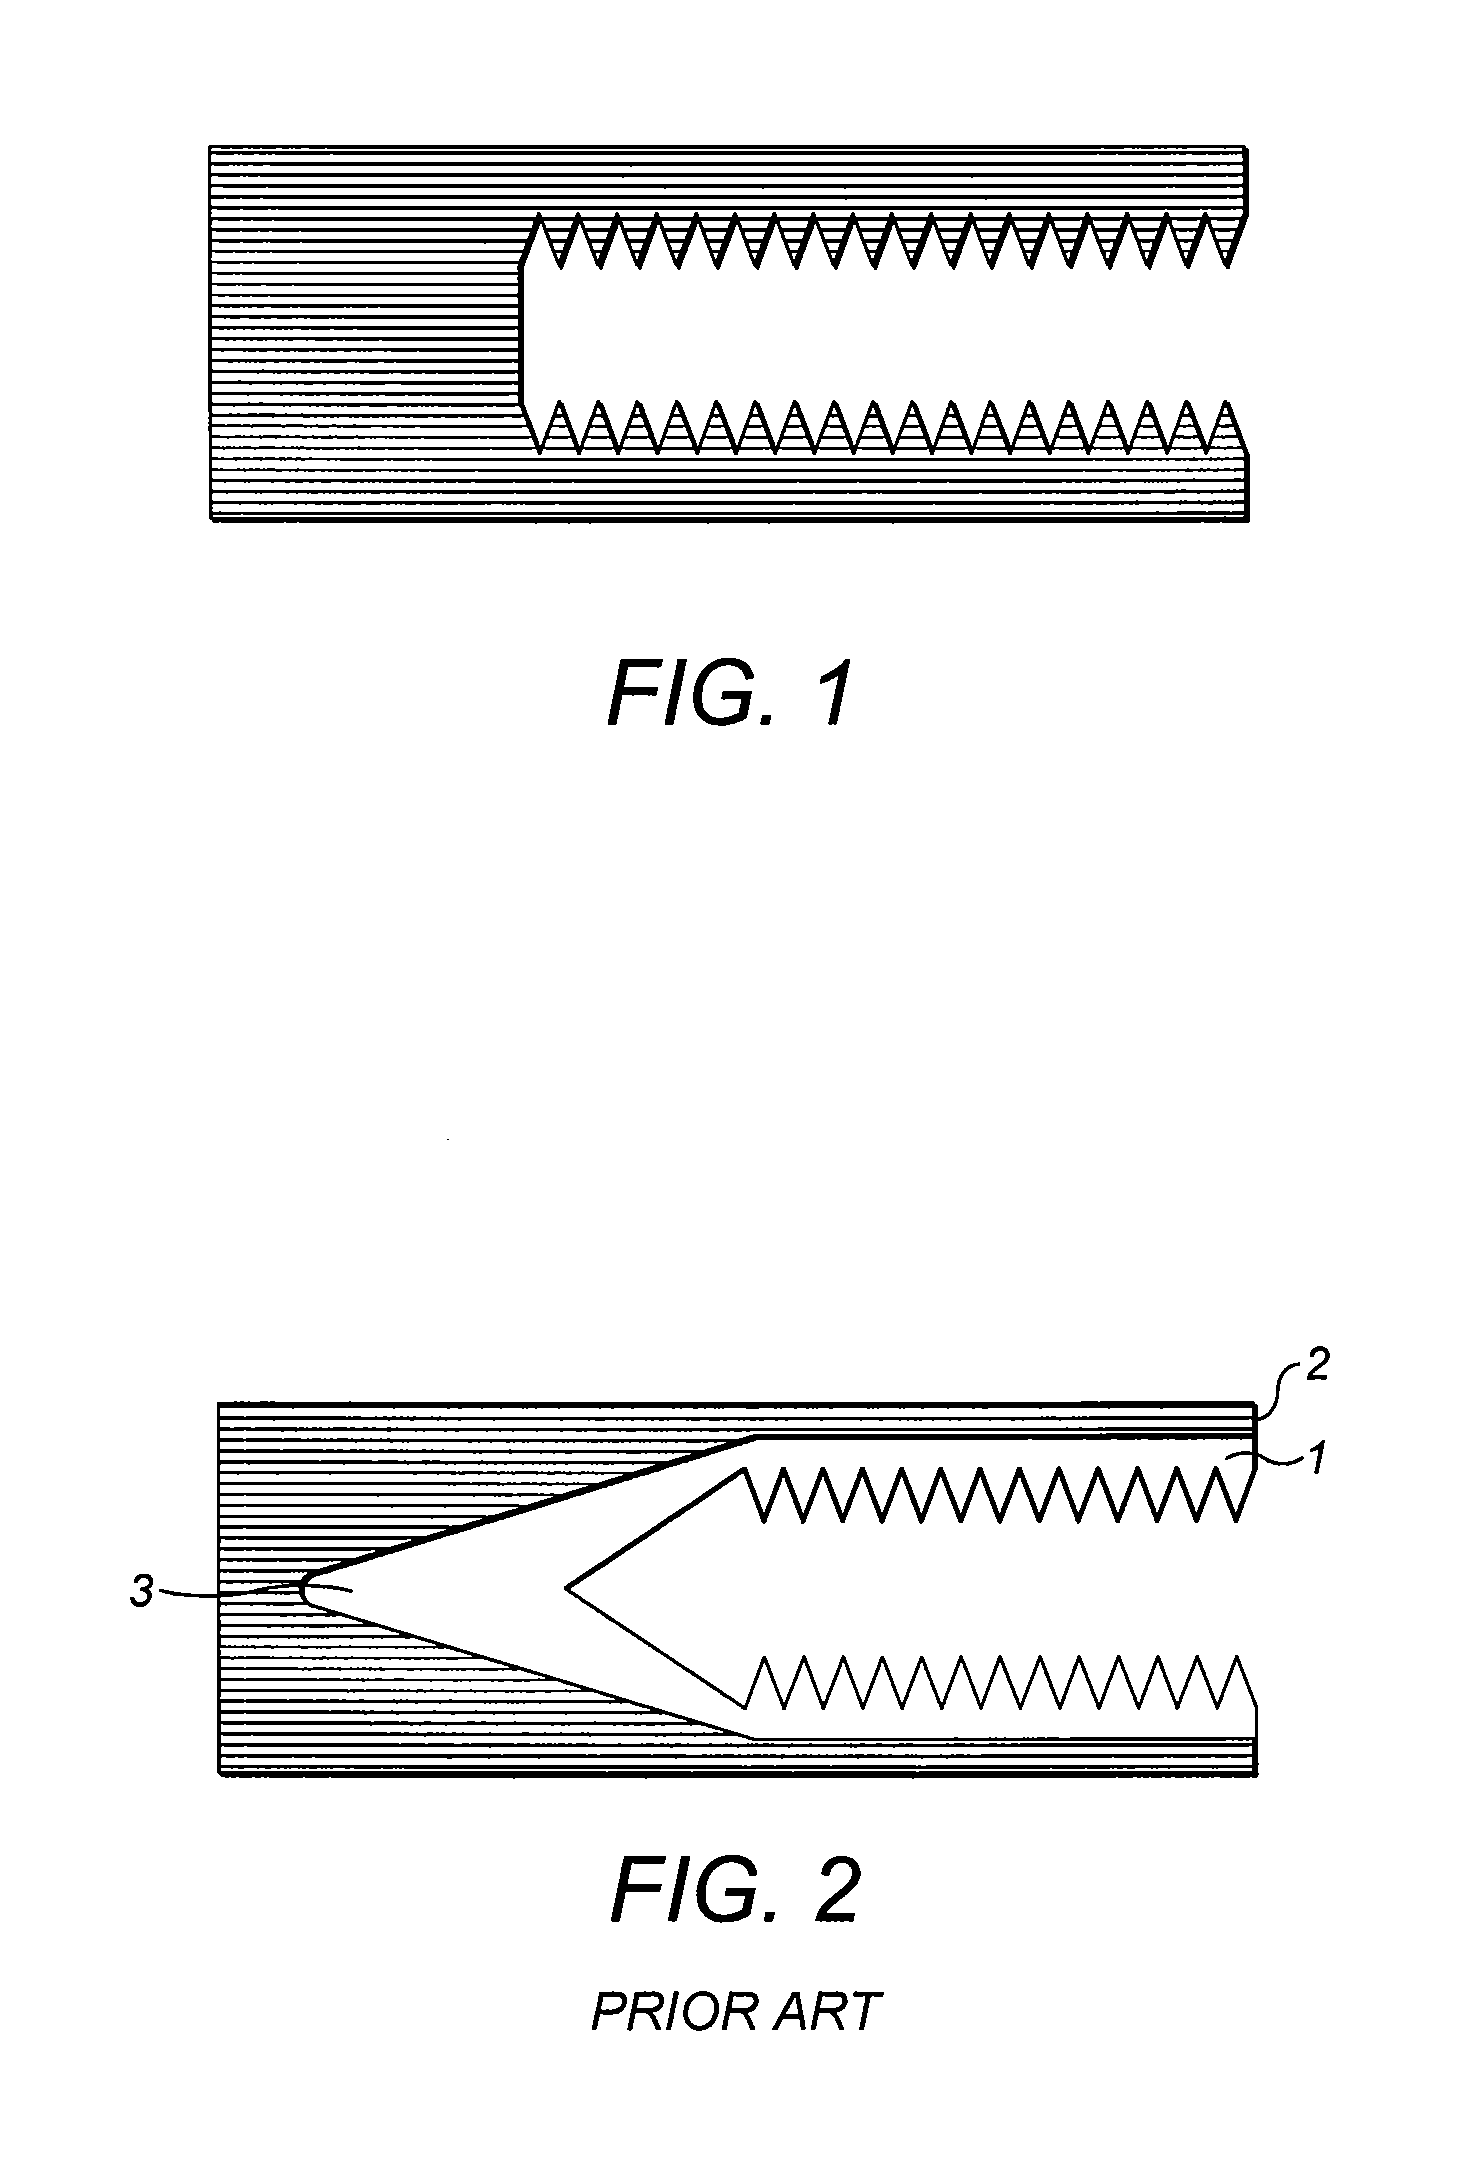 Insert for forming an end connection in a uni-axial composite material